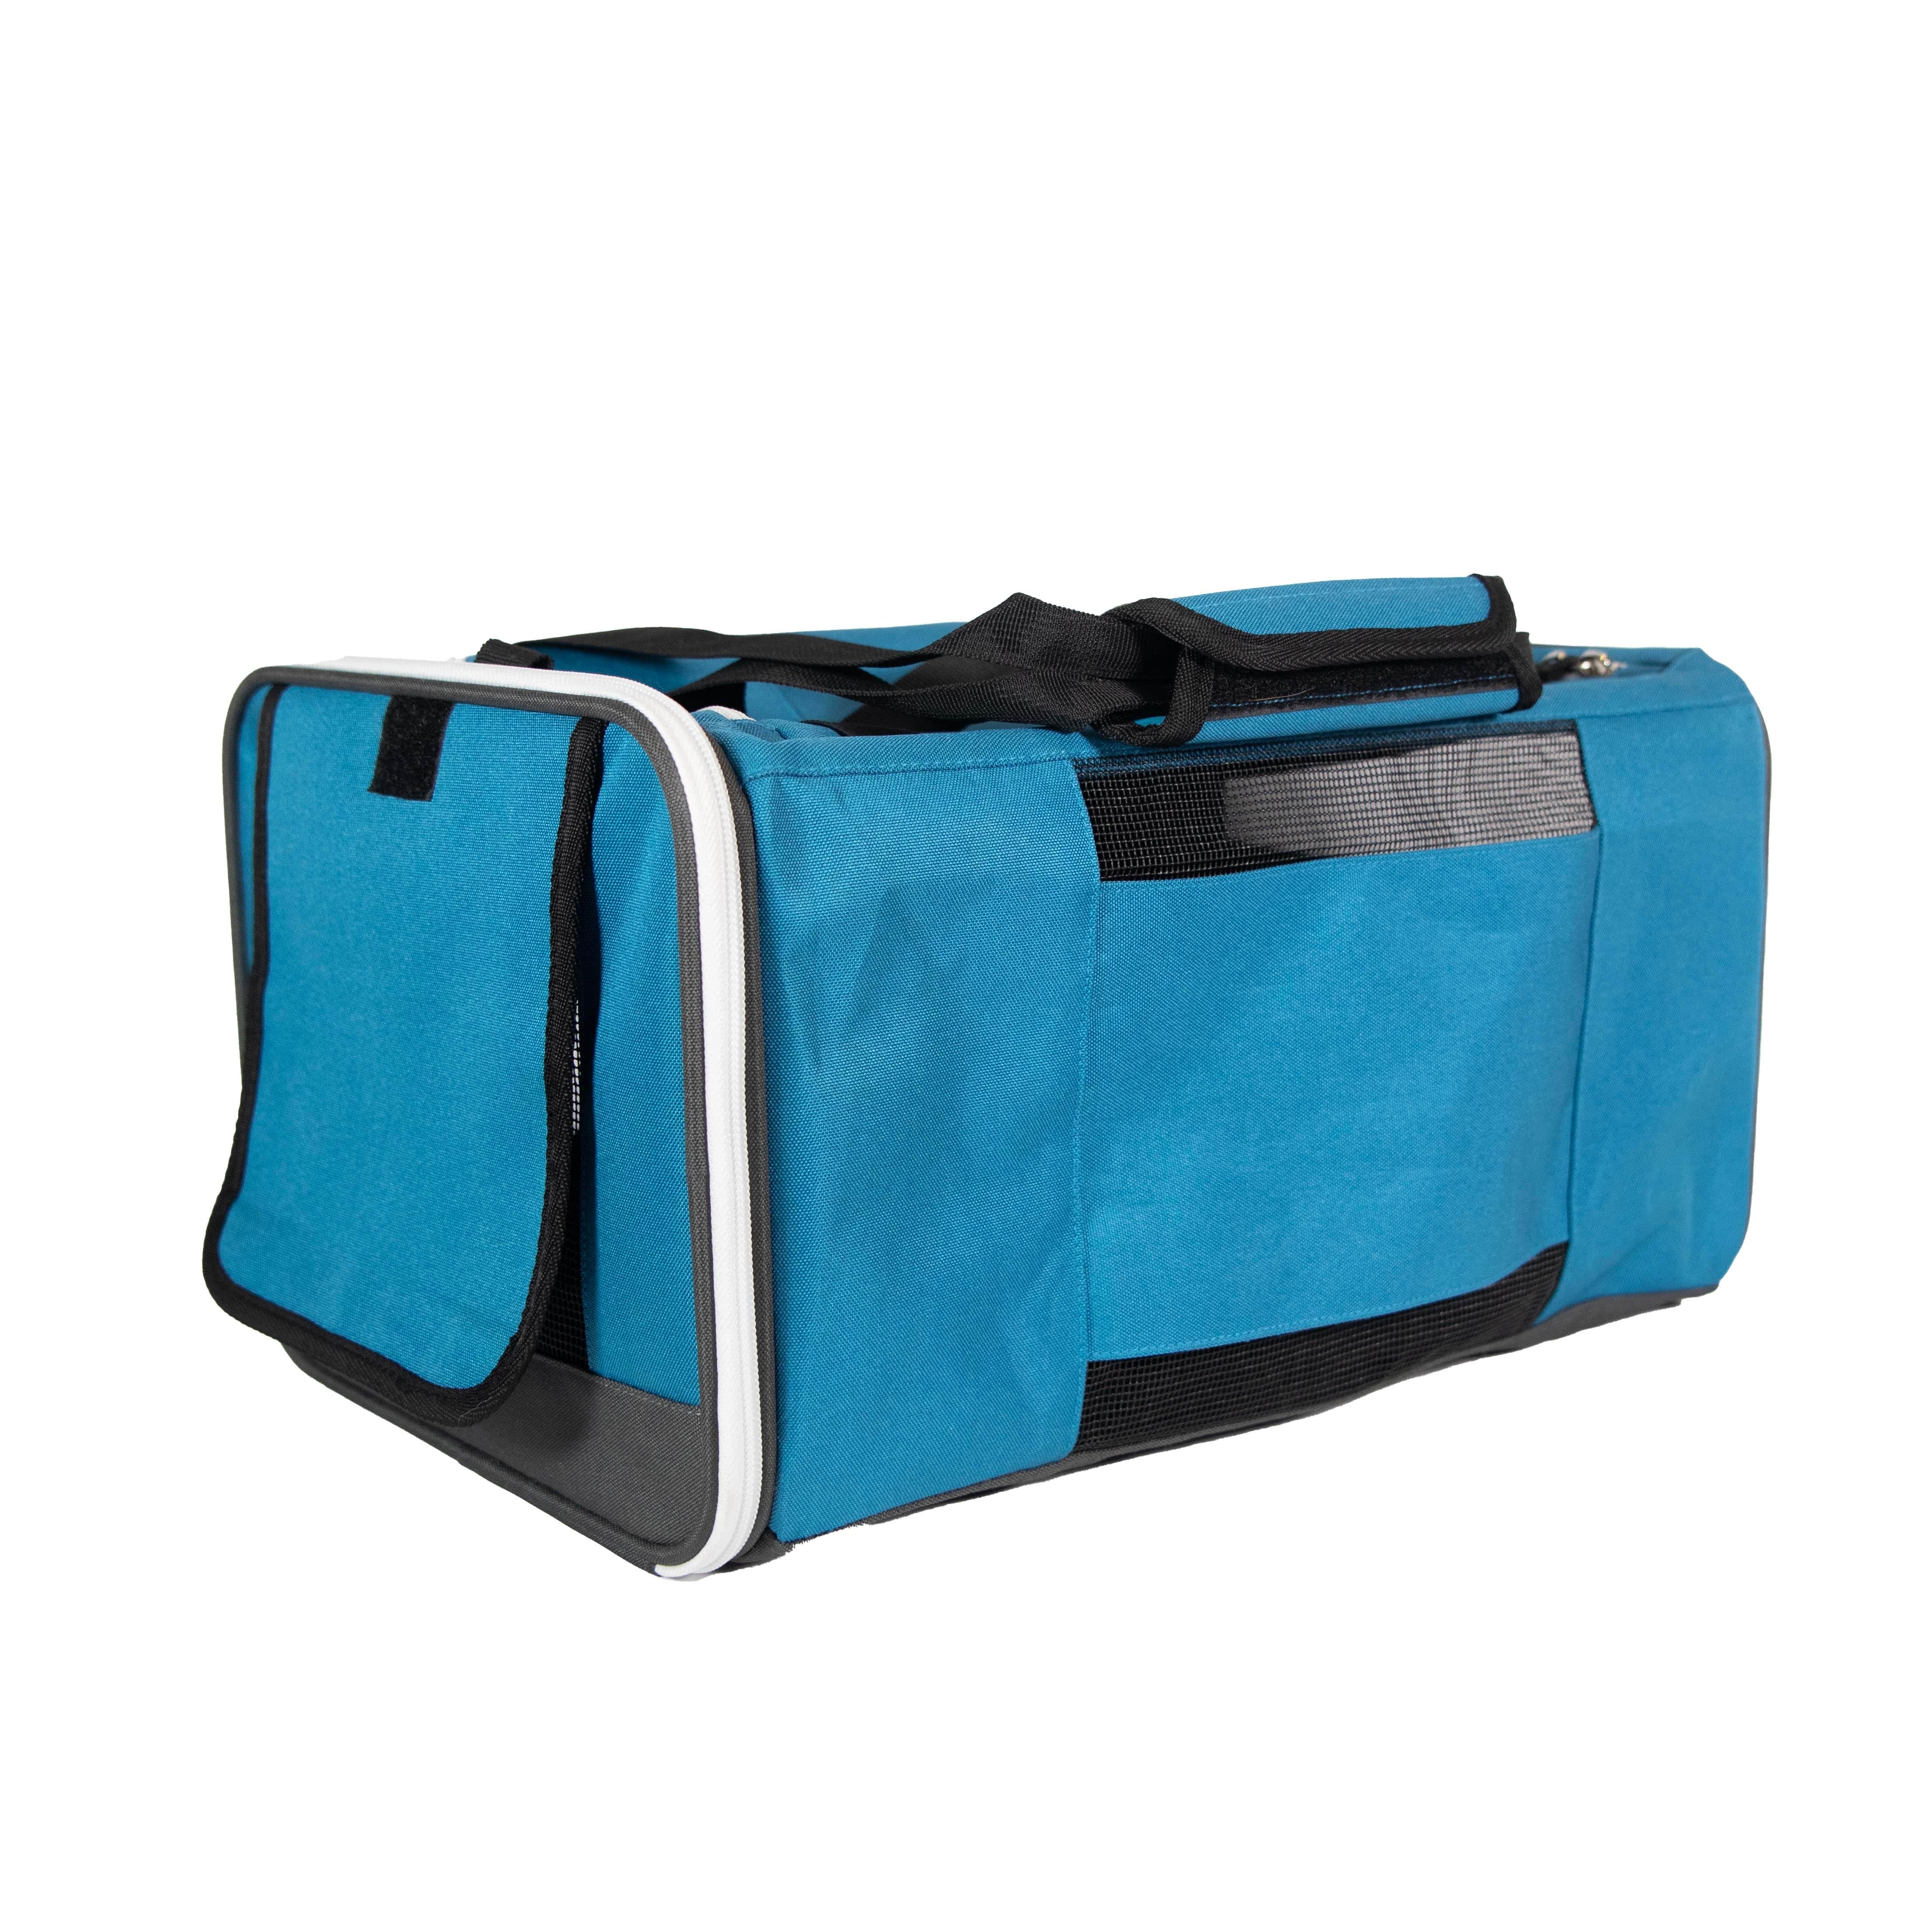 "The Odyssey" Soft Cat Carrier for Every Day and Air Travel